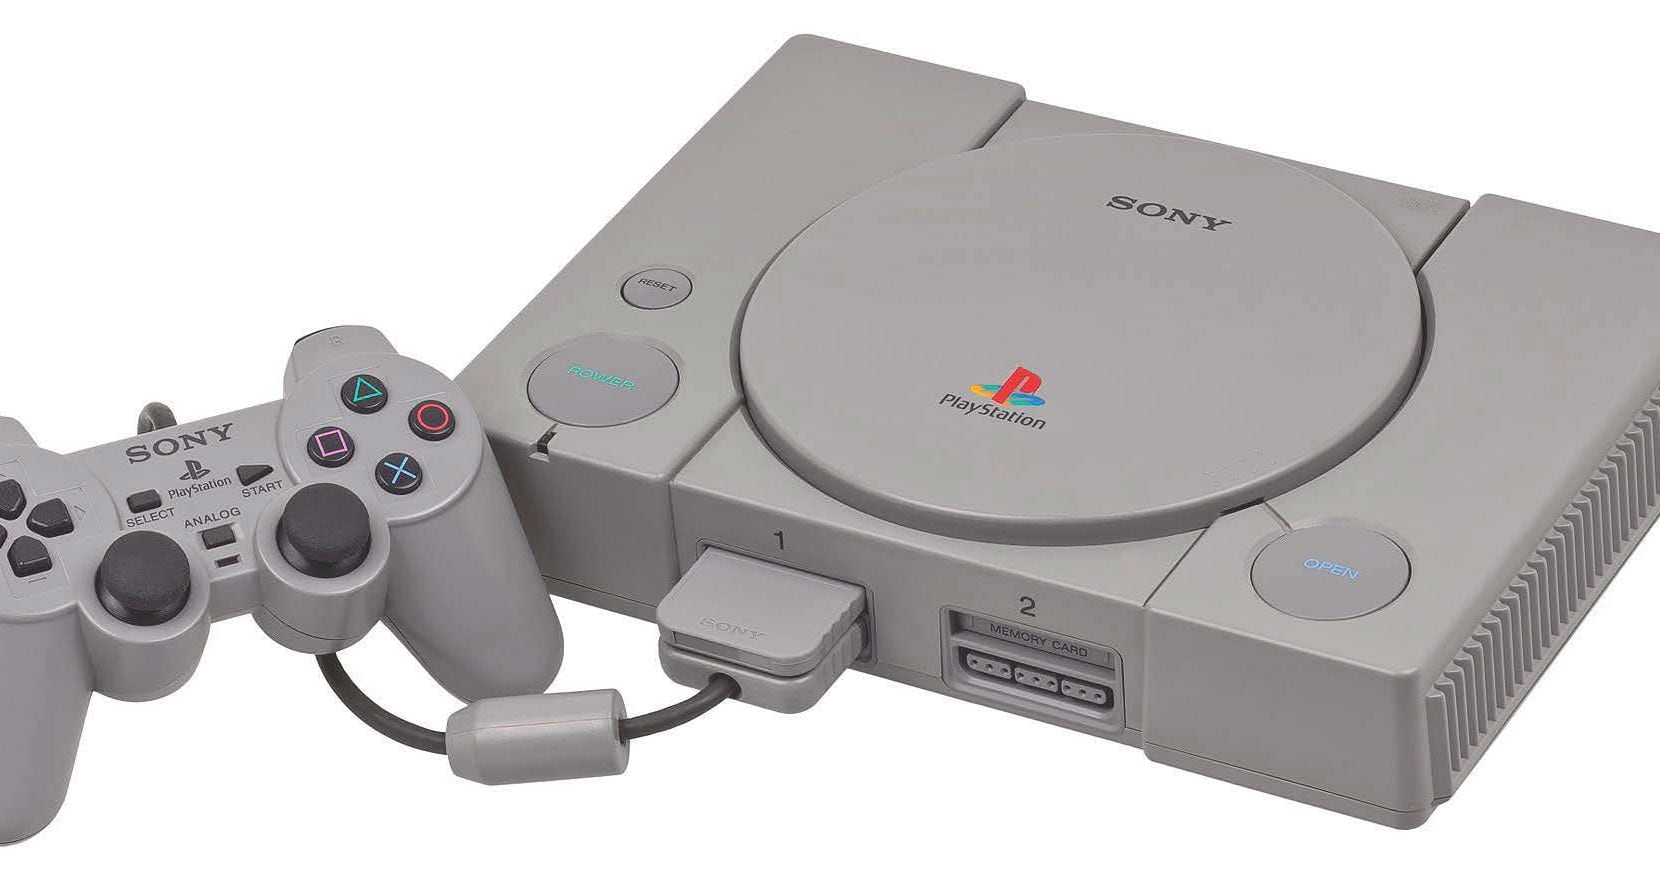 Xbox and PlayStation: A look at Microsoft and Sony's console history